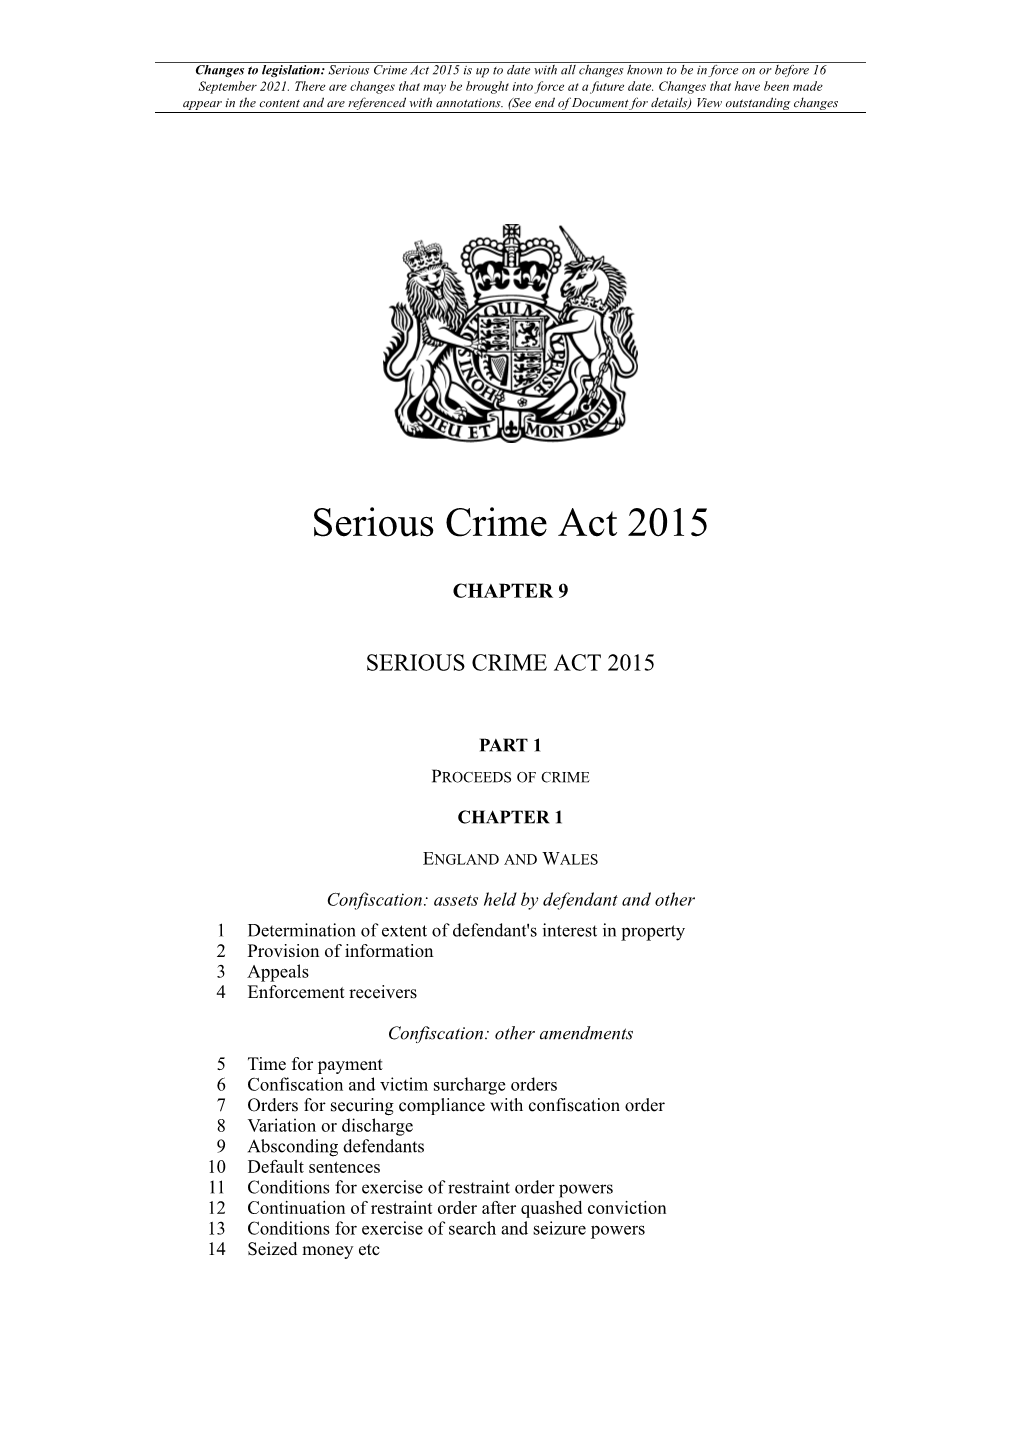 Serious Crime Act 2015 Is up to Date with All Changes Known to Be in Force on Or Before 16 September 2021